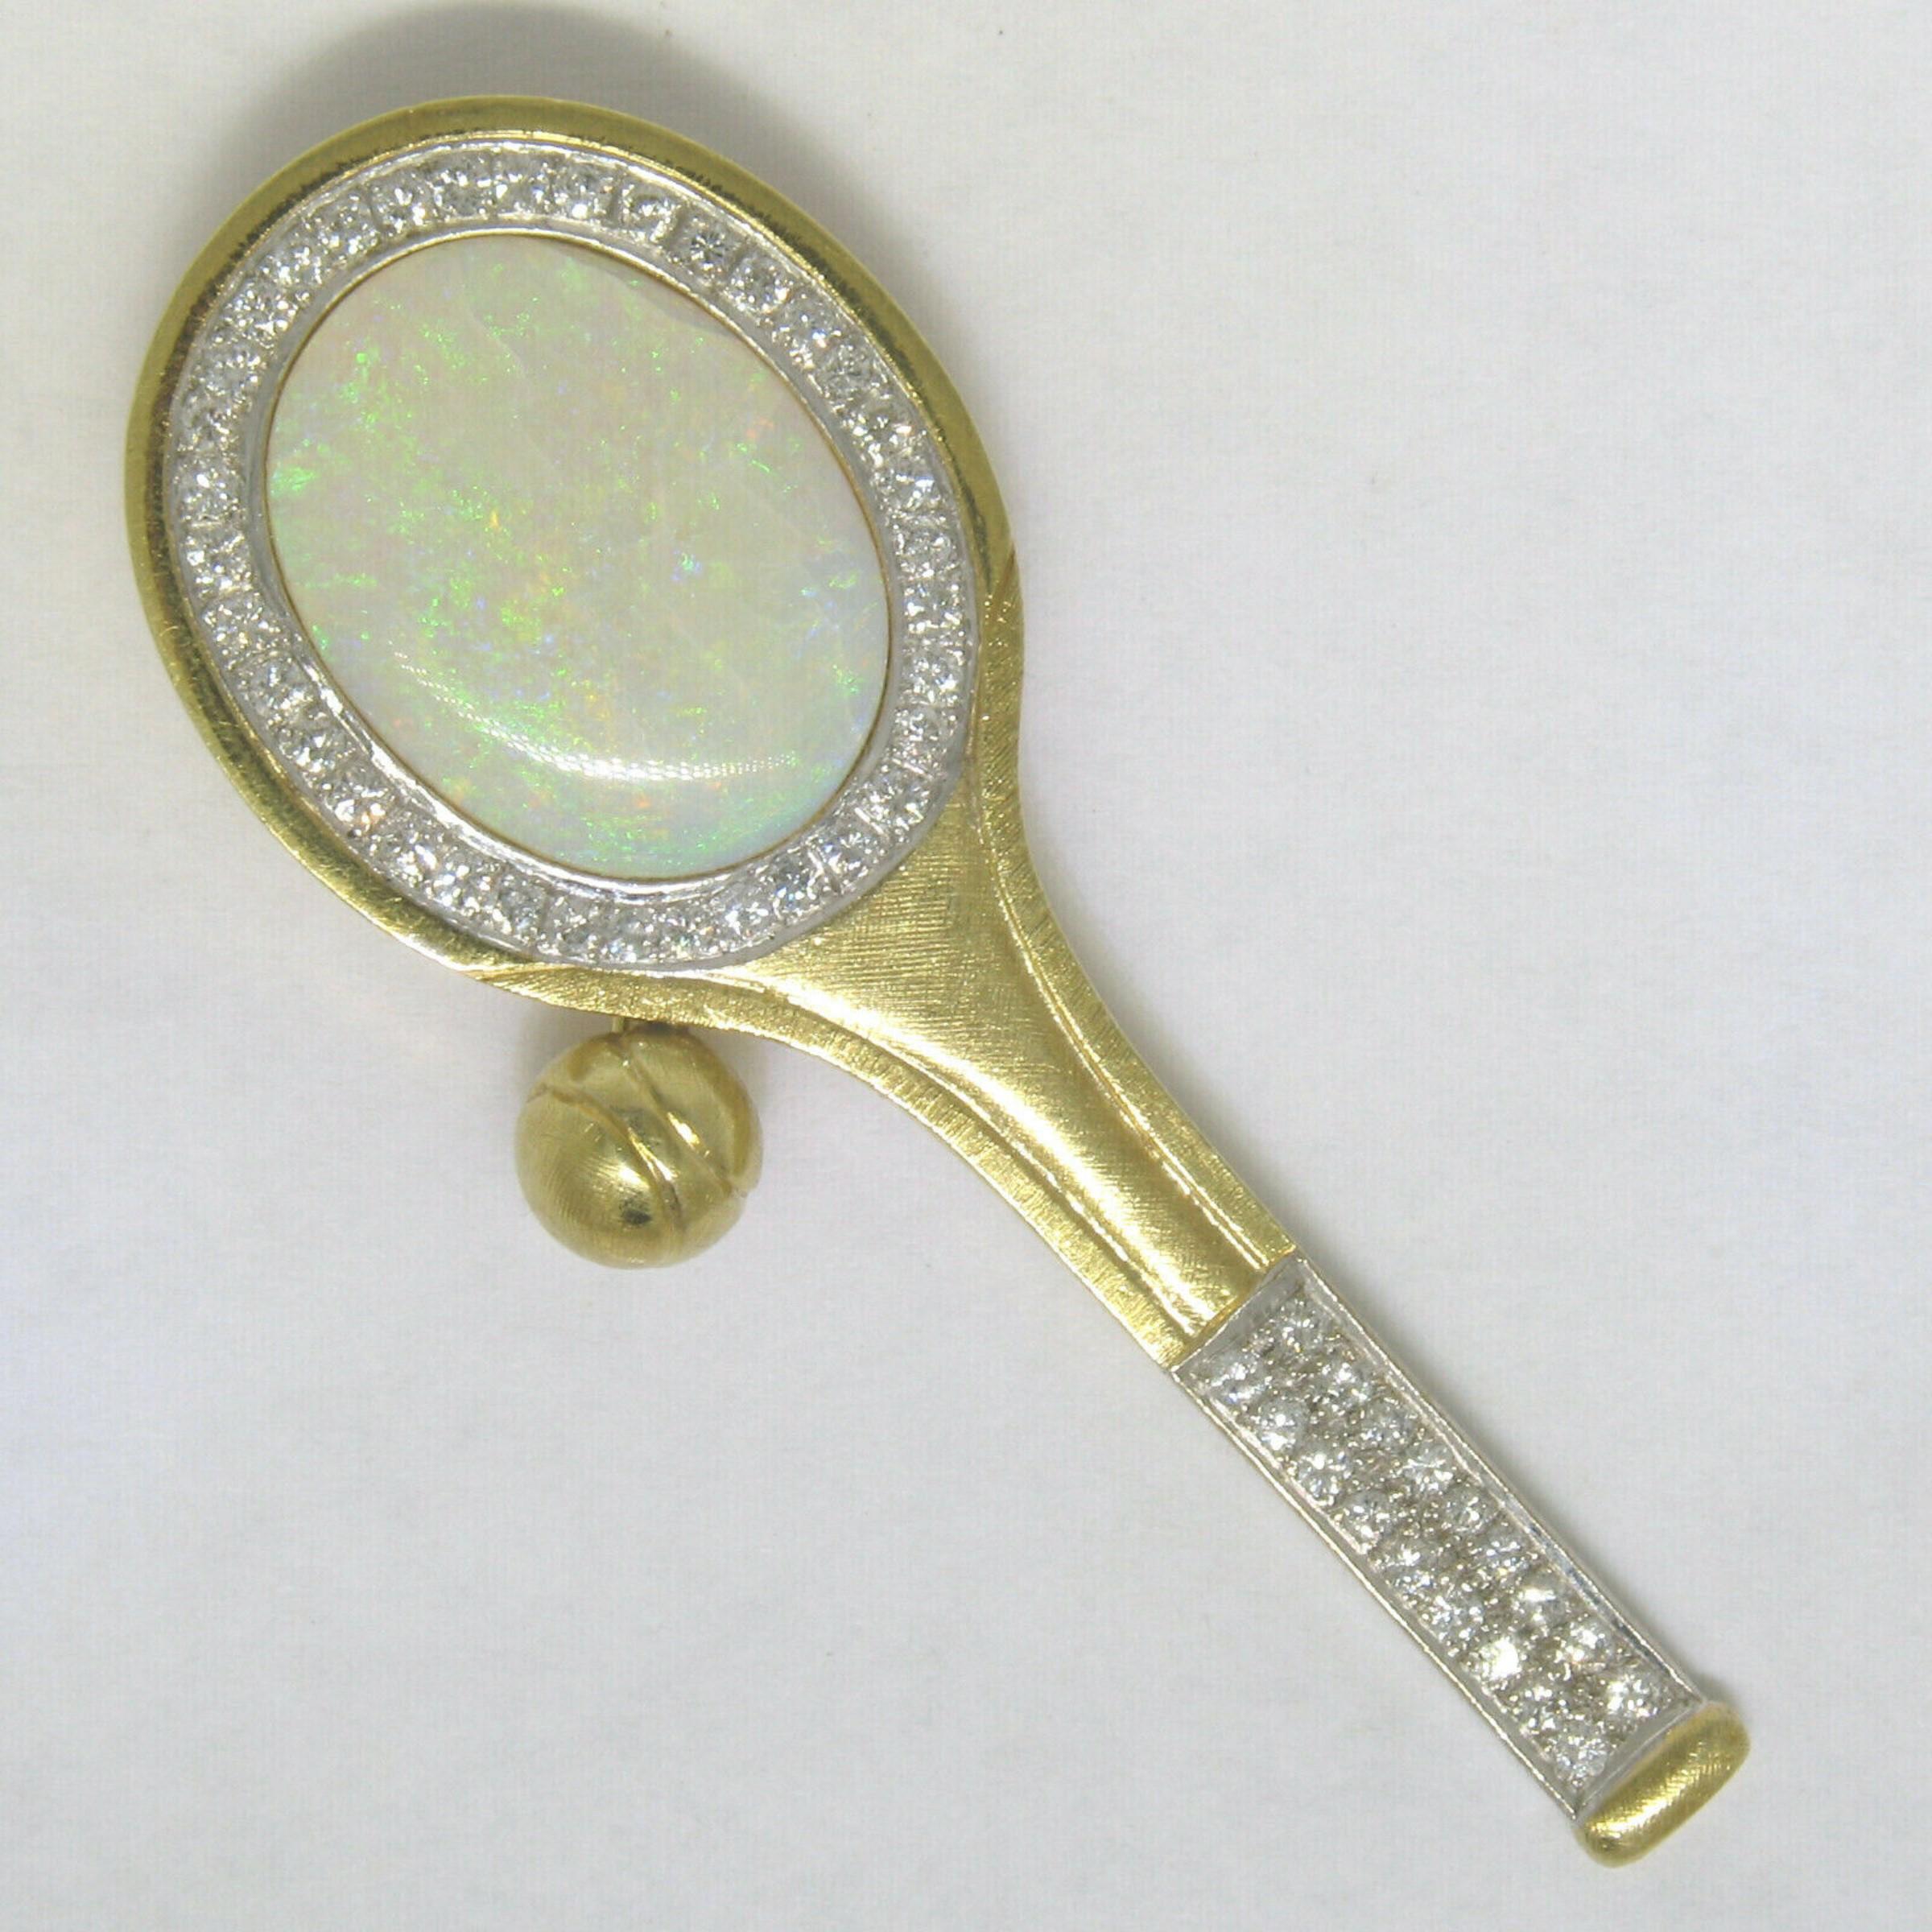 You are looking at an amazingly designed tennis racket brooch or pendant crafted in solid 18k yellow gold featuring a large, very colorful, oval cabochon opal. The Australian opal stone displays tremendous amounts of color play over the translucent